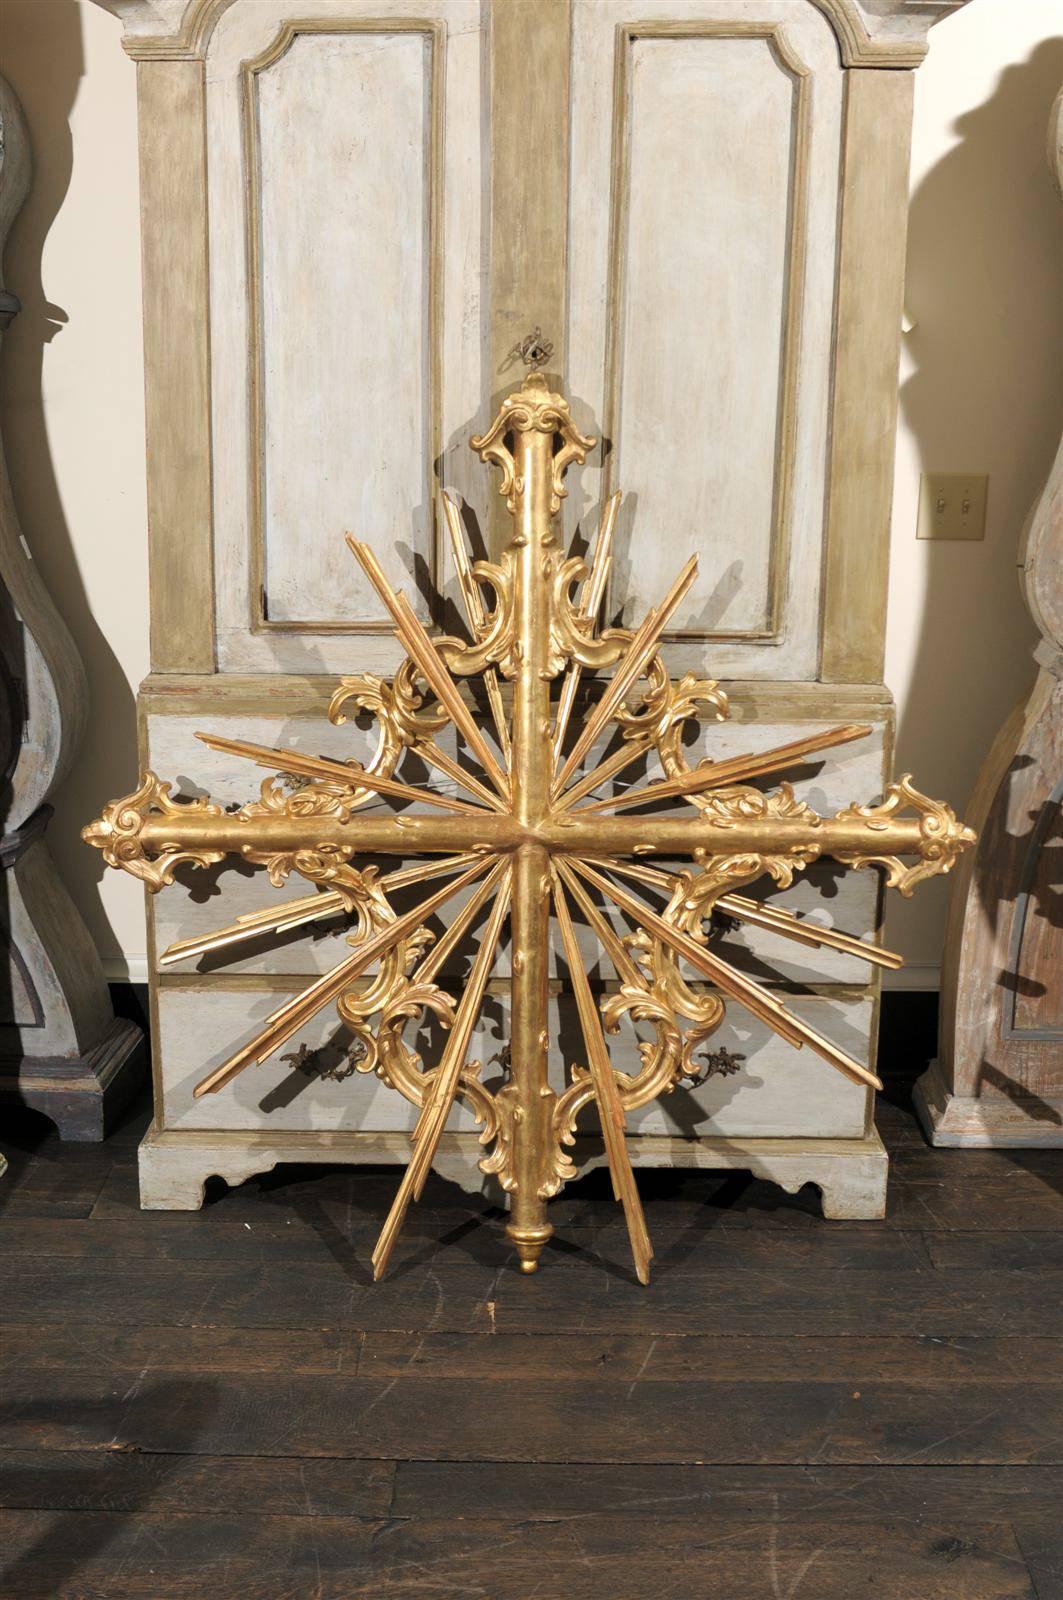 A 19th century large size gilded wood Italian cross over sunrays with exquisite carving.